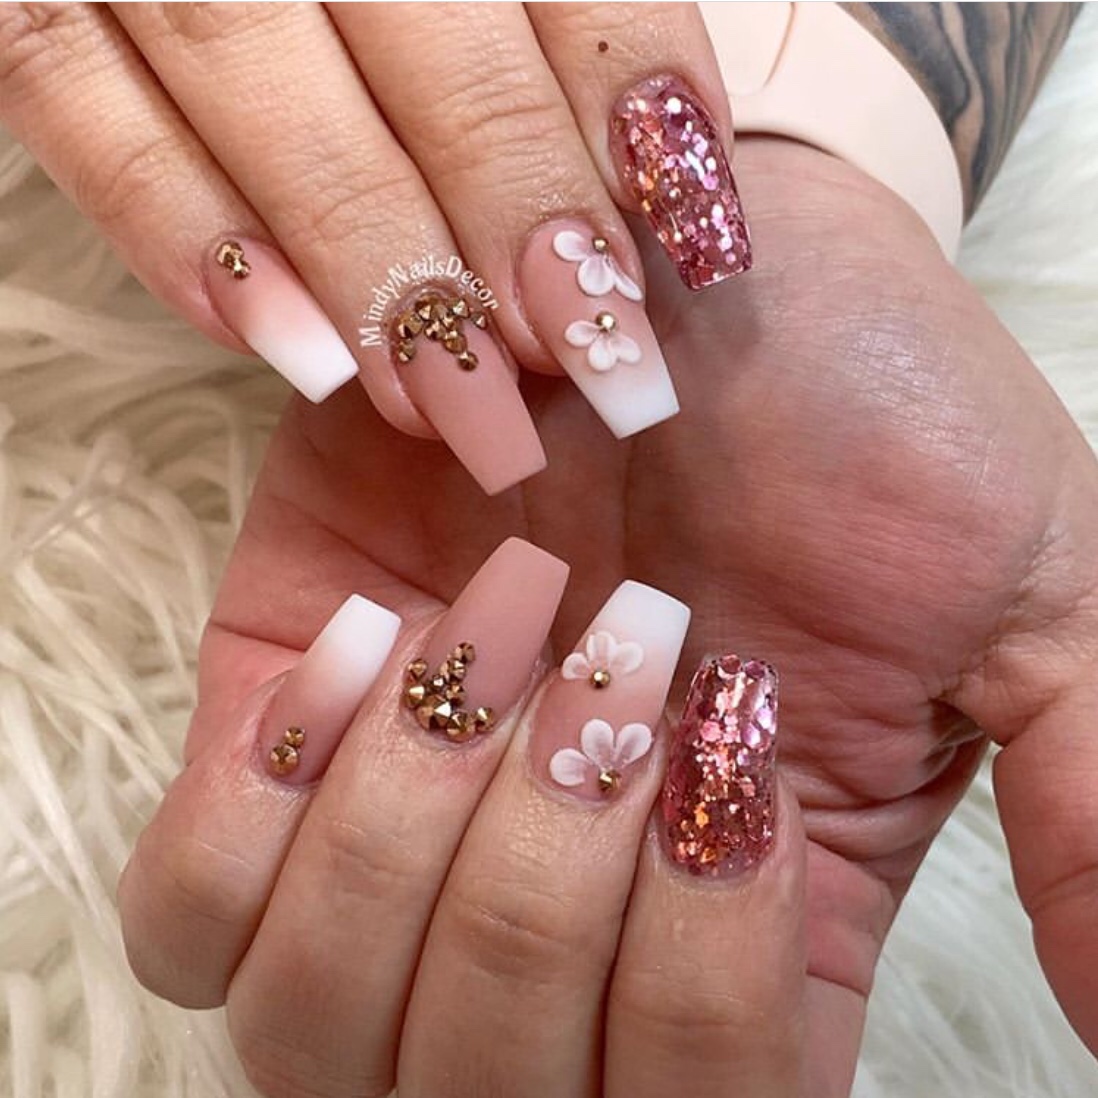 40 Best Spring Nail Designs To Try in 2023 - The Trend Spotter